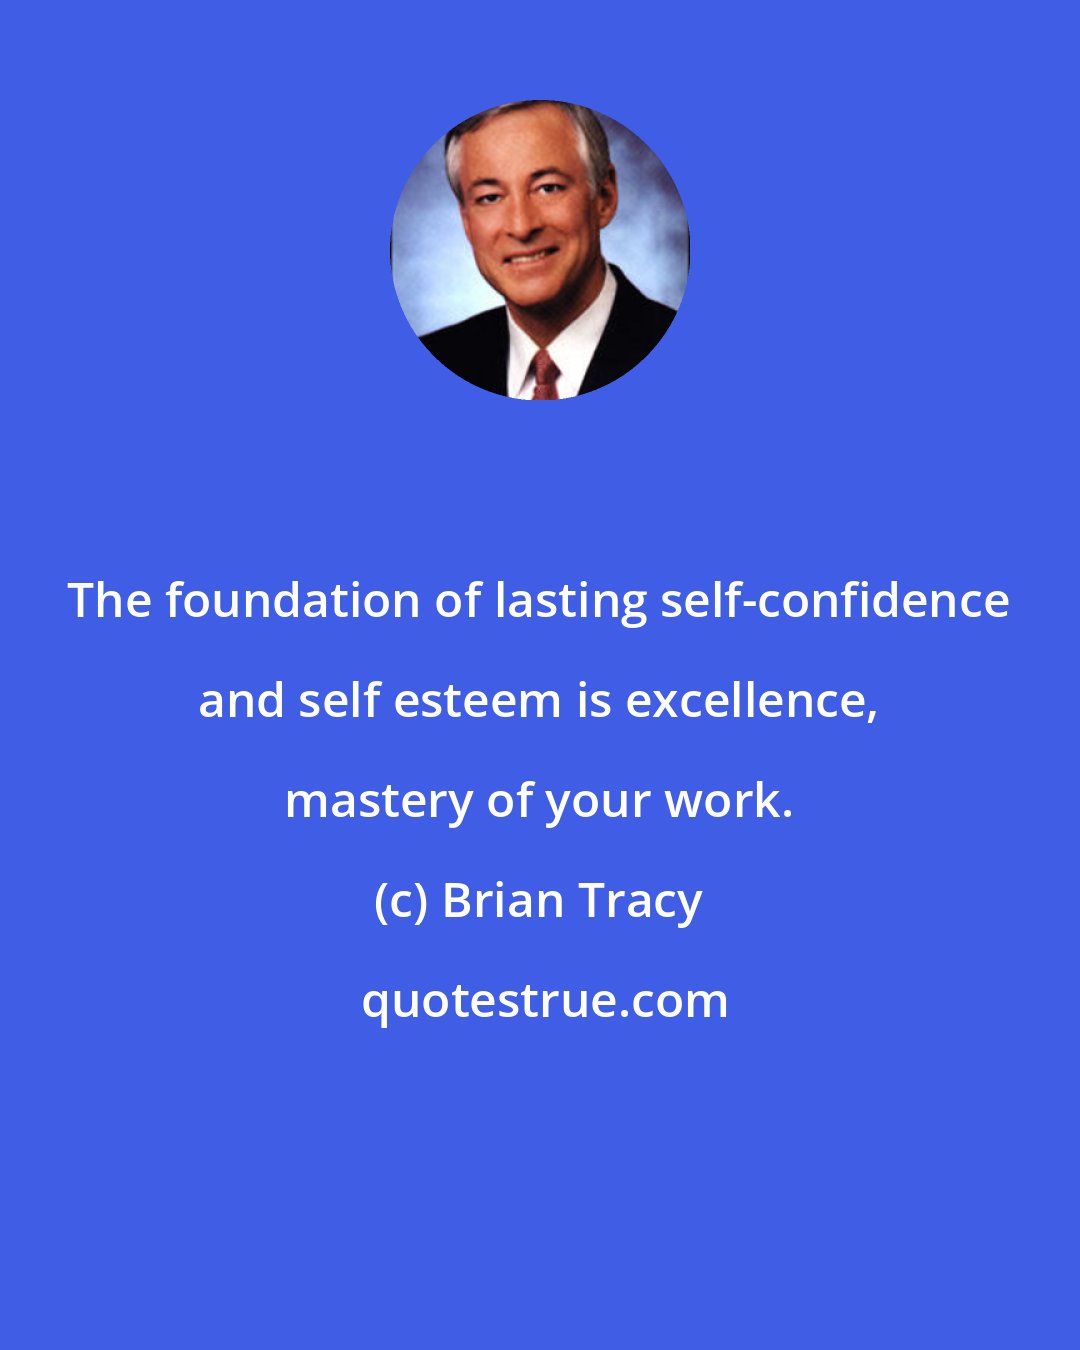 Brian Tracy: The foundation of lasting self-confidence and self esteem is excellence, mastery of your work.